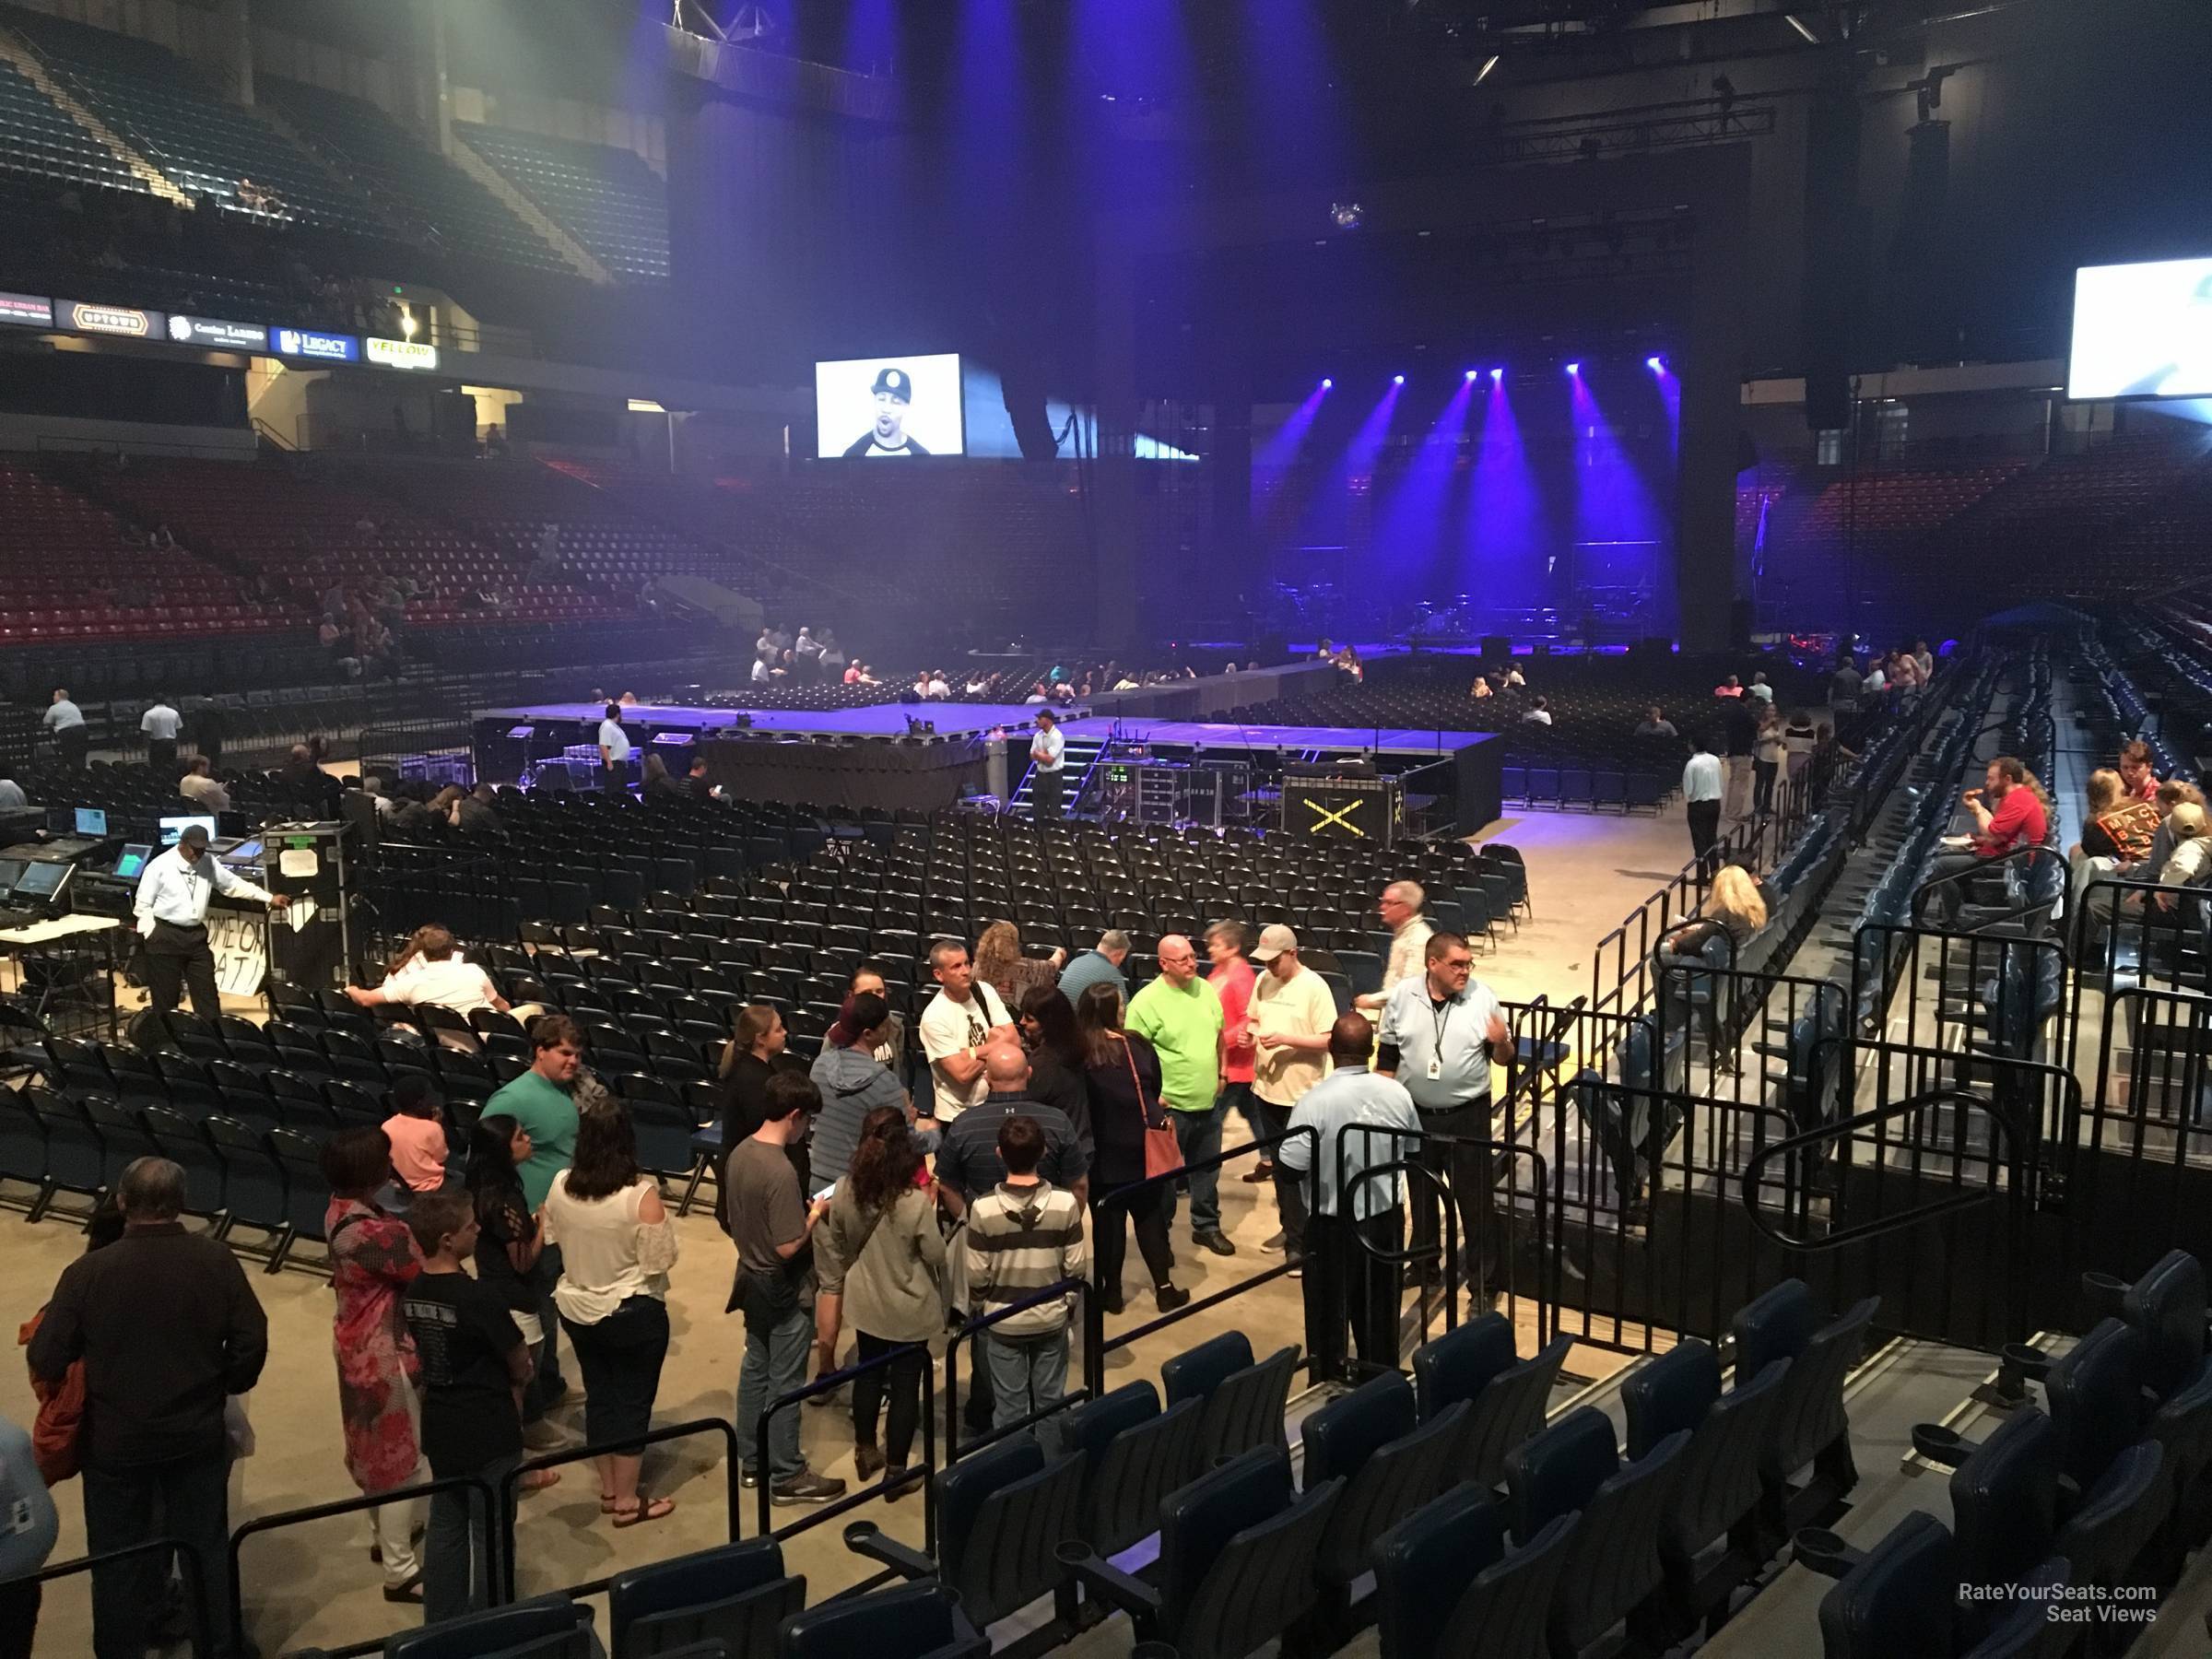 section 118, row h seat view  - legacy arena at the bjcc